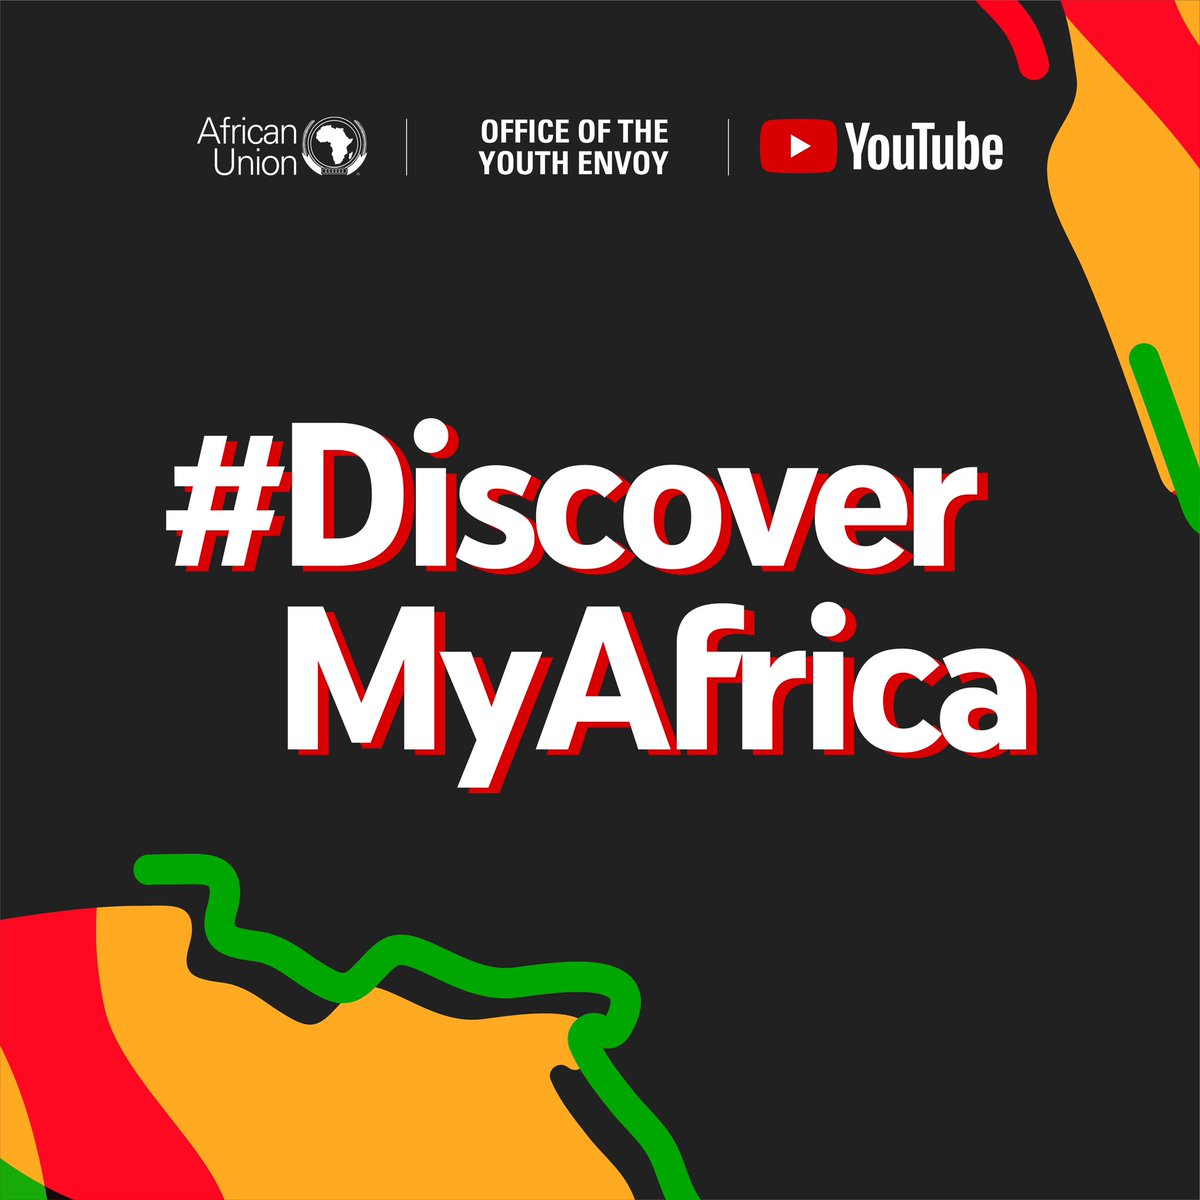 Press Release: The @AU_YouthEnvoy and @googleafrica partner to celebrate Africa Month with the #DiscoverMyAfrica Shorts Challenge! Showcase Africa's vibrant culture, creativity & spirit. Read more: au.int/en/pressreleas…